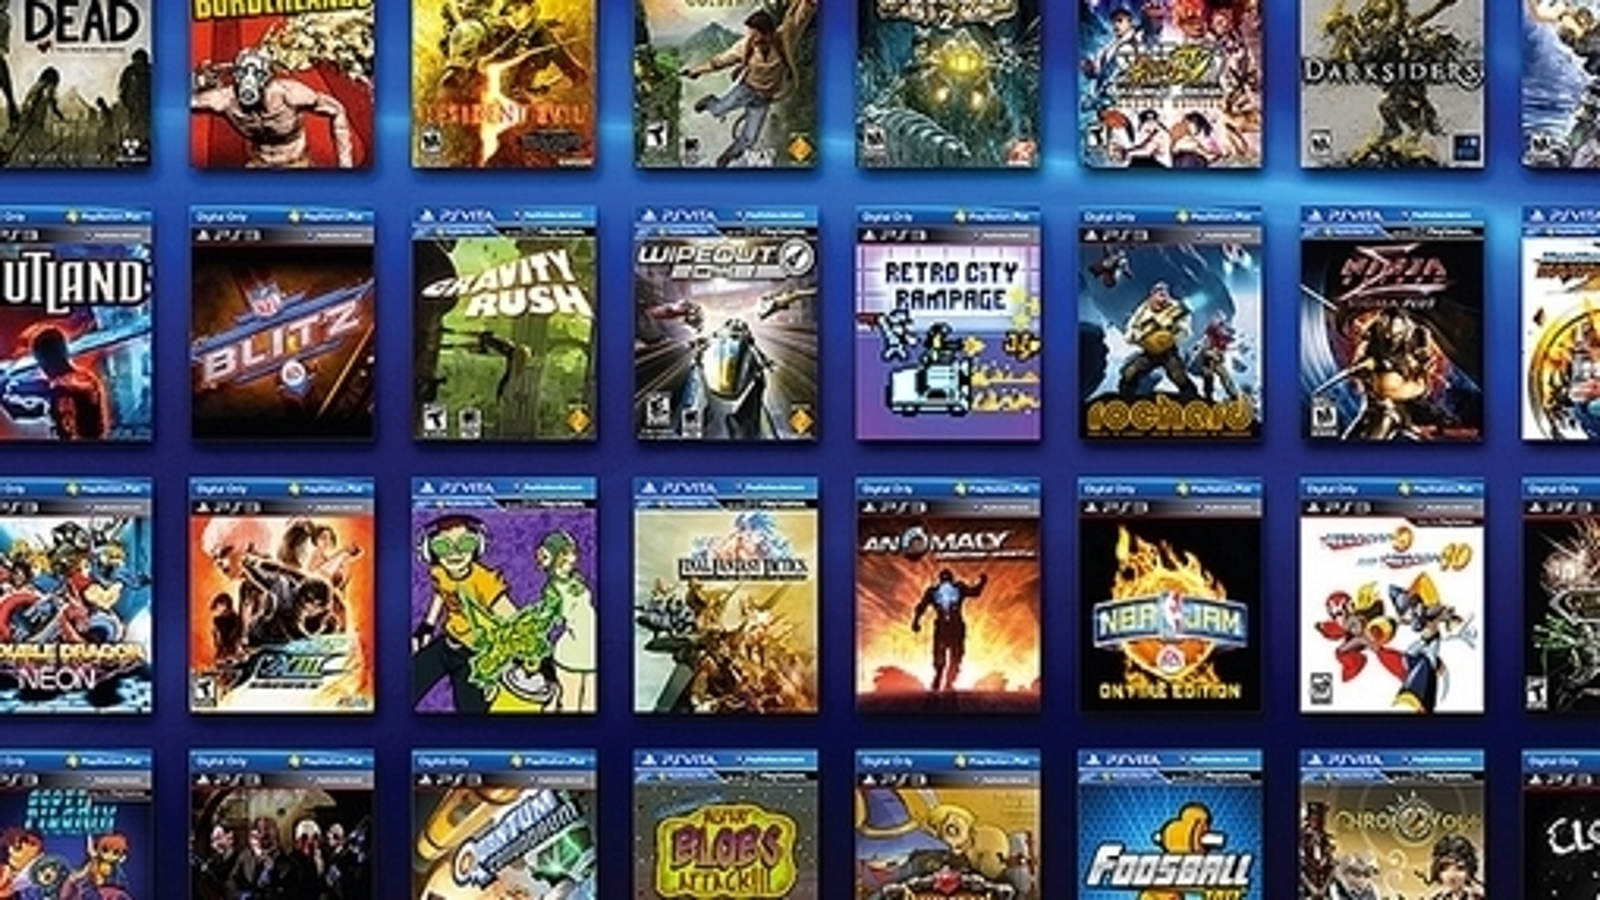 Why A Developer Can't Make a Game Backwards Compatible on the PS4